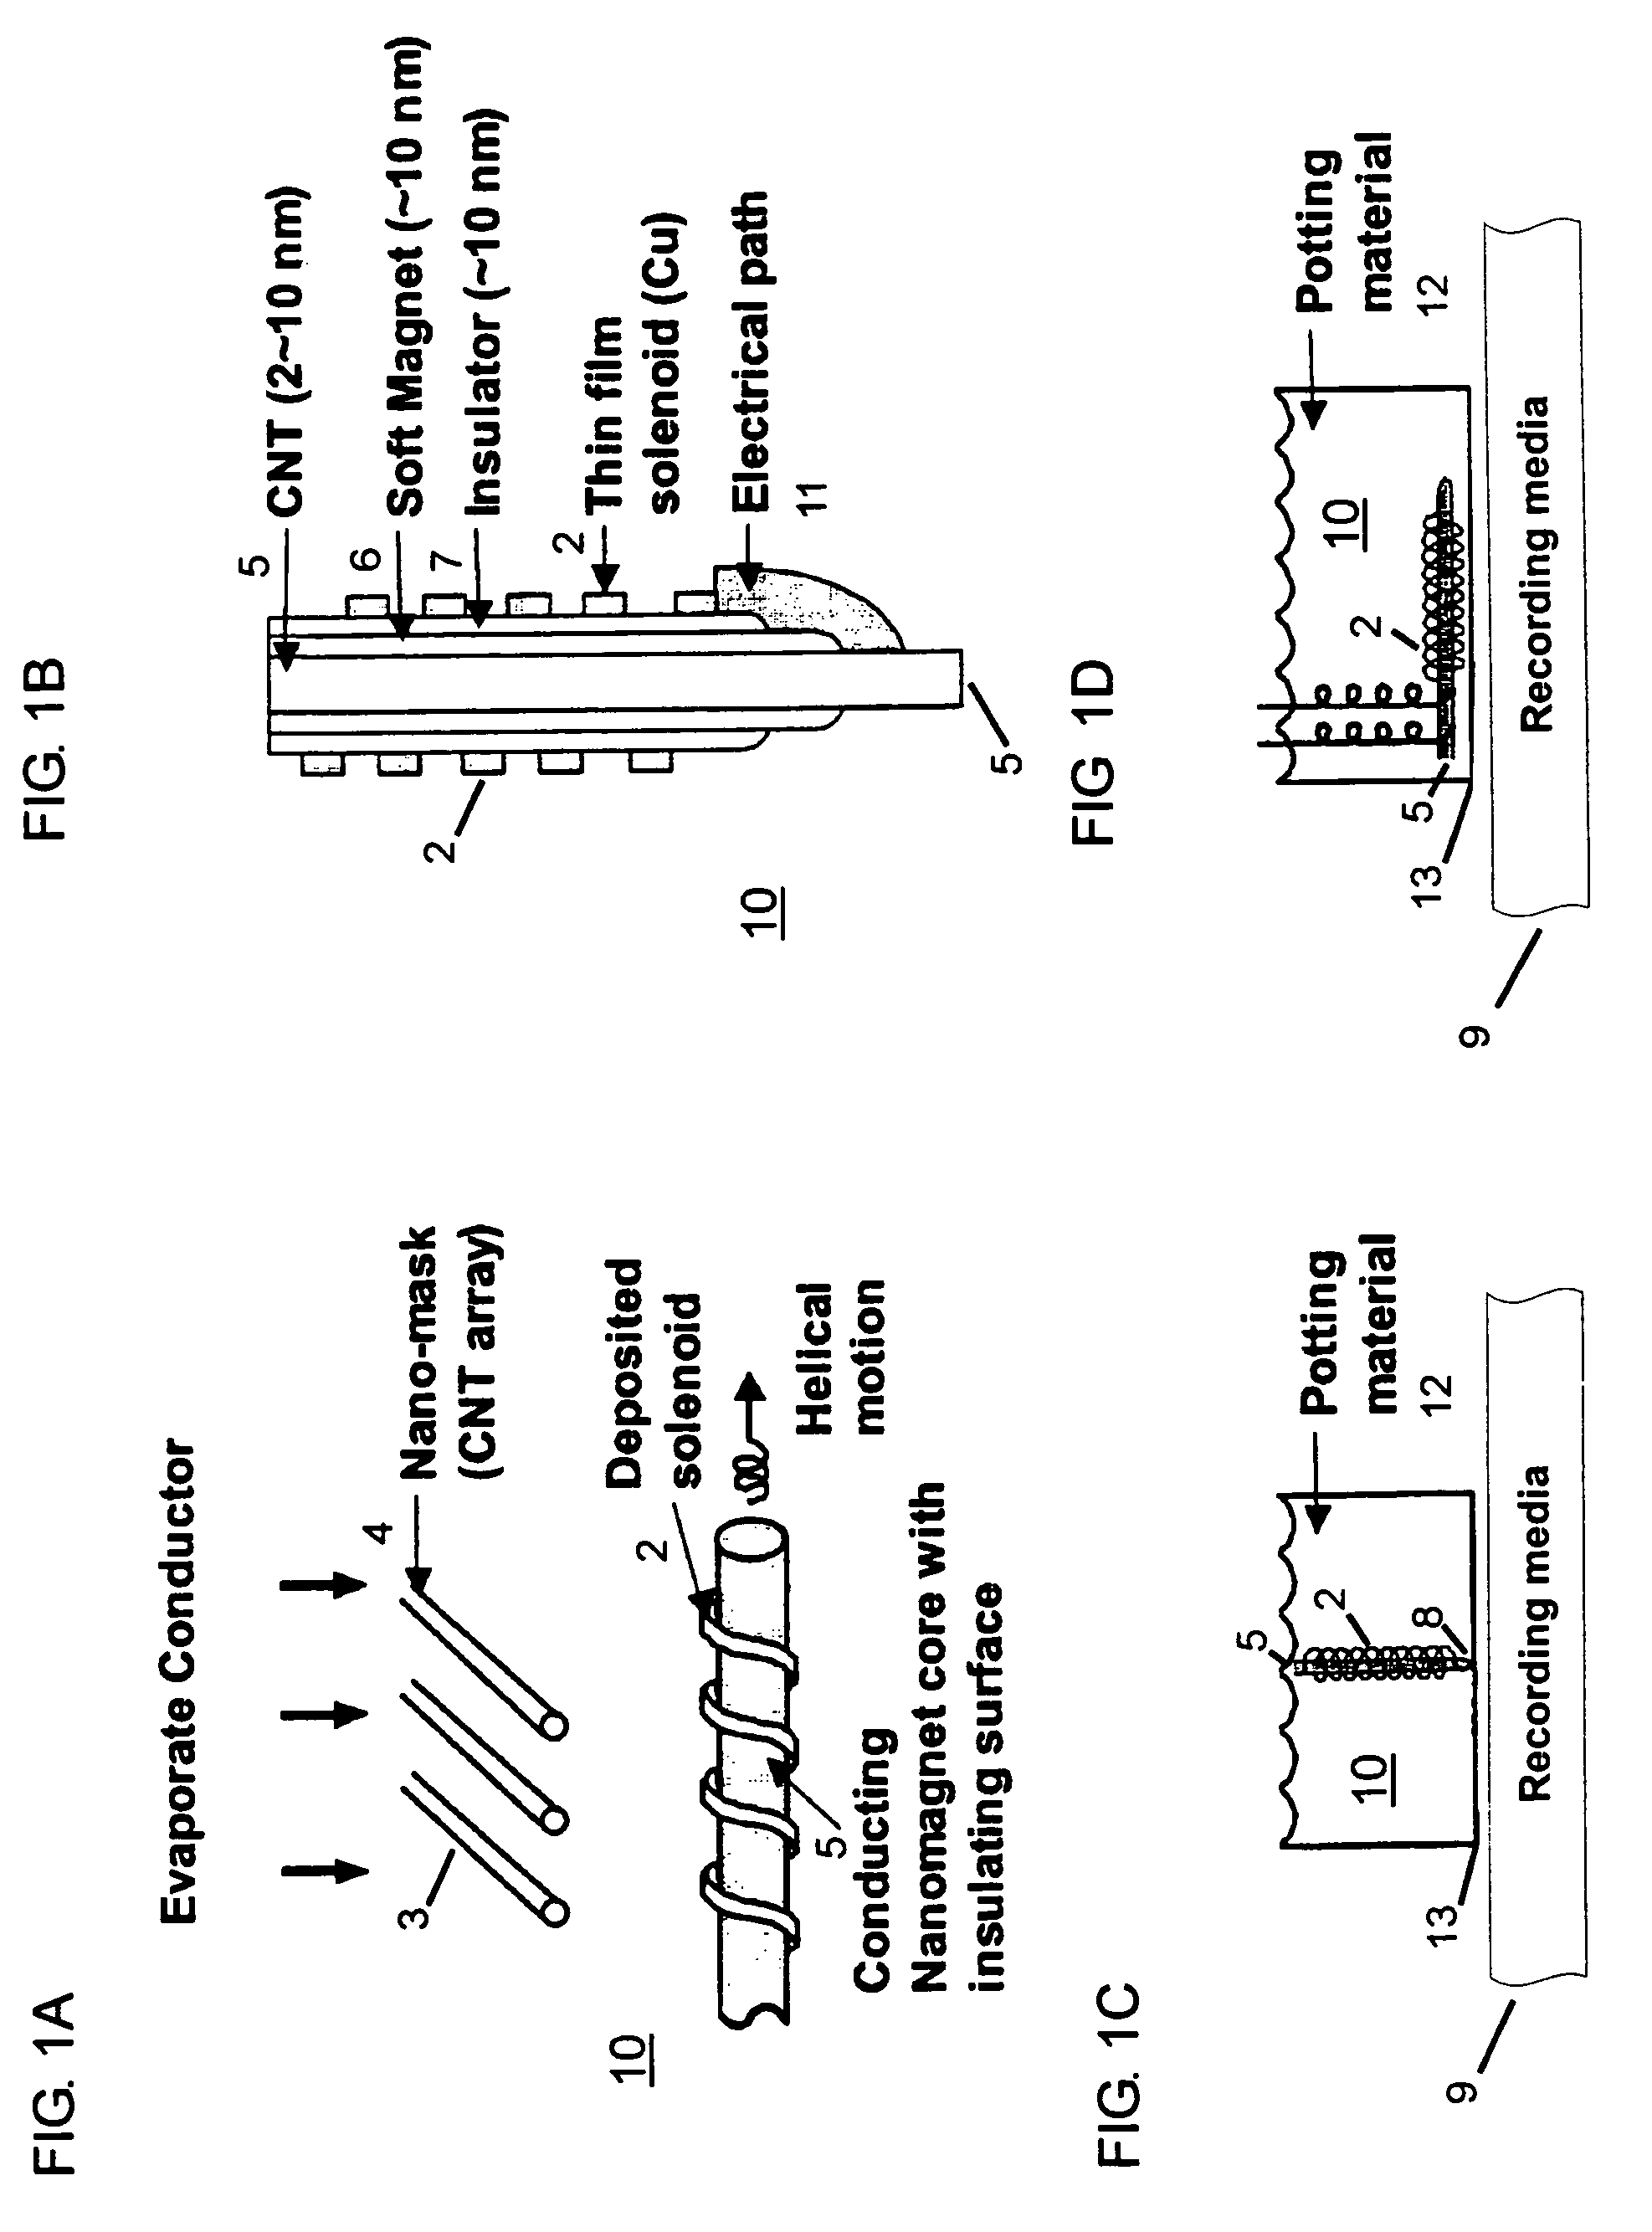 Read head for ultra-high-density information storage media and method for making the same